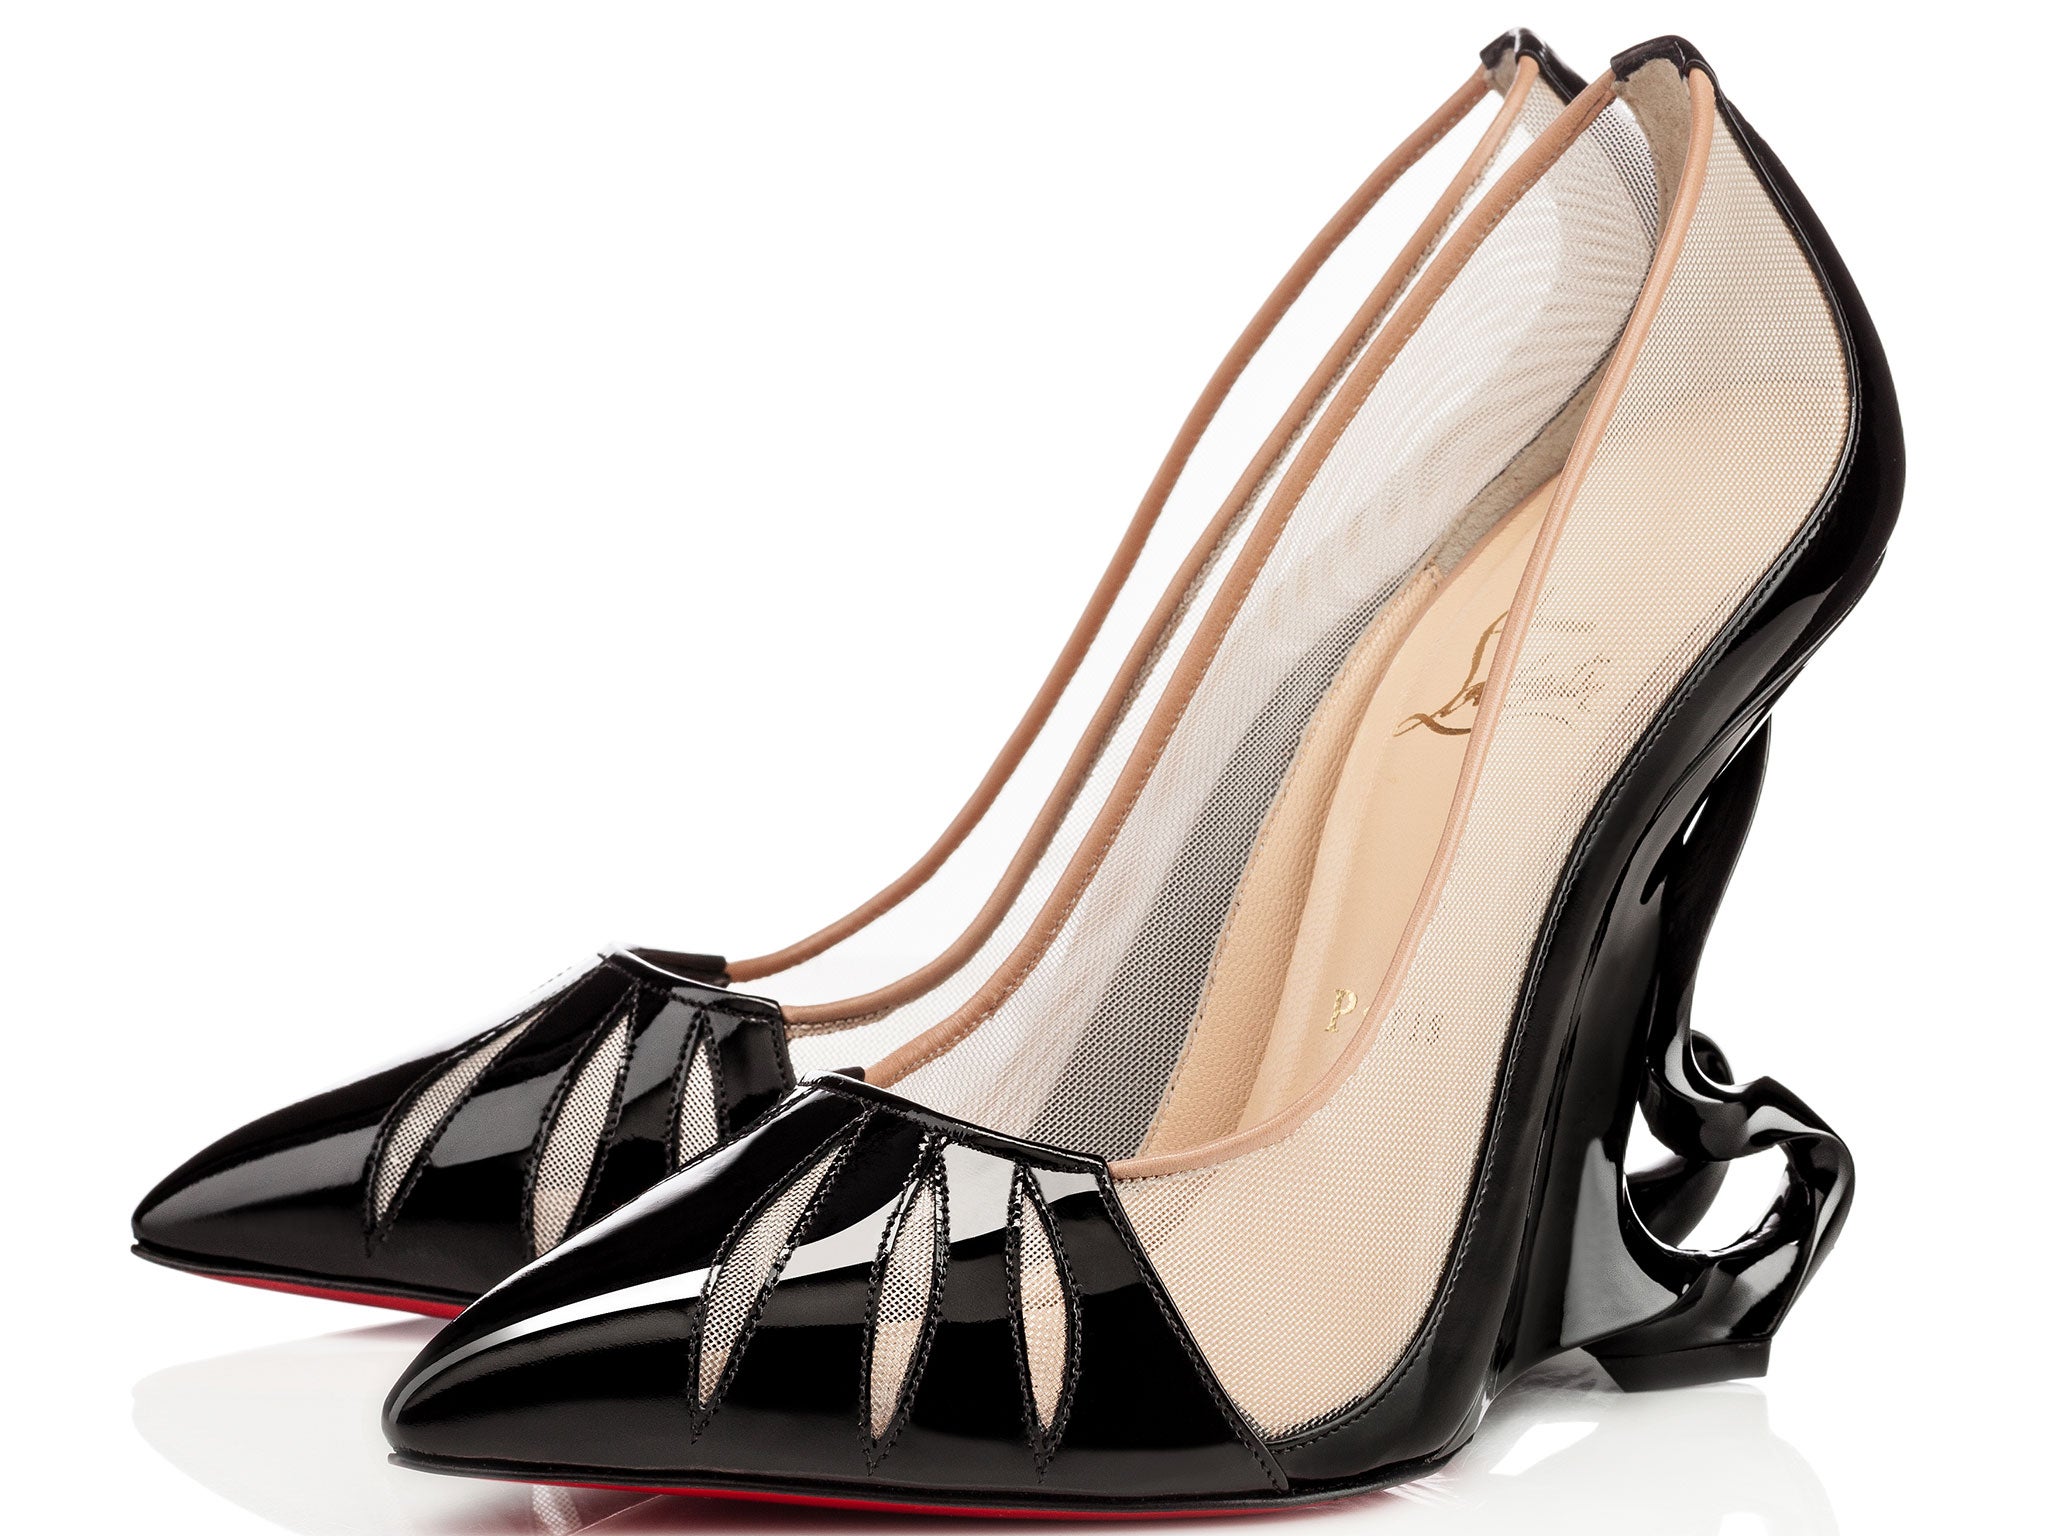 Angelina Christian Louboutin Maleficent be yours for almost £1k | The Independent | The Independent